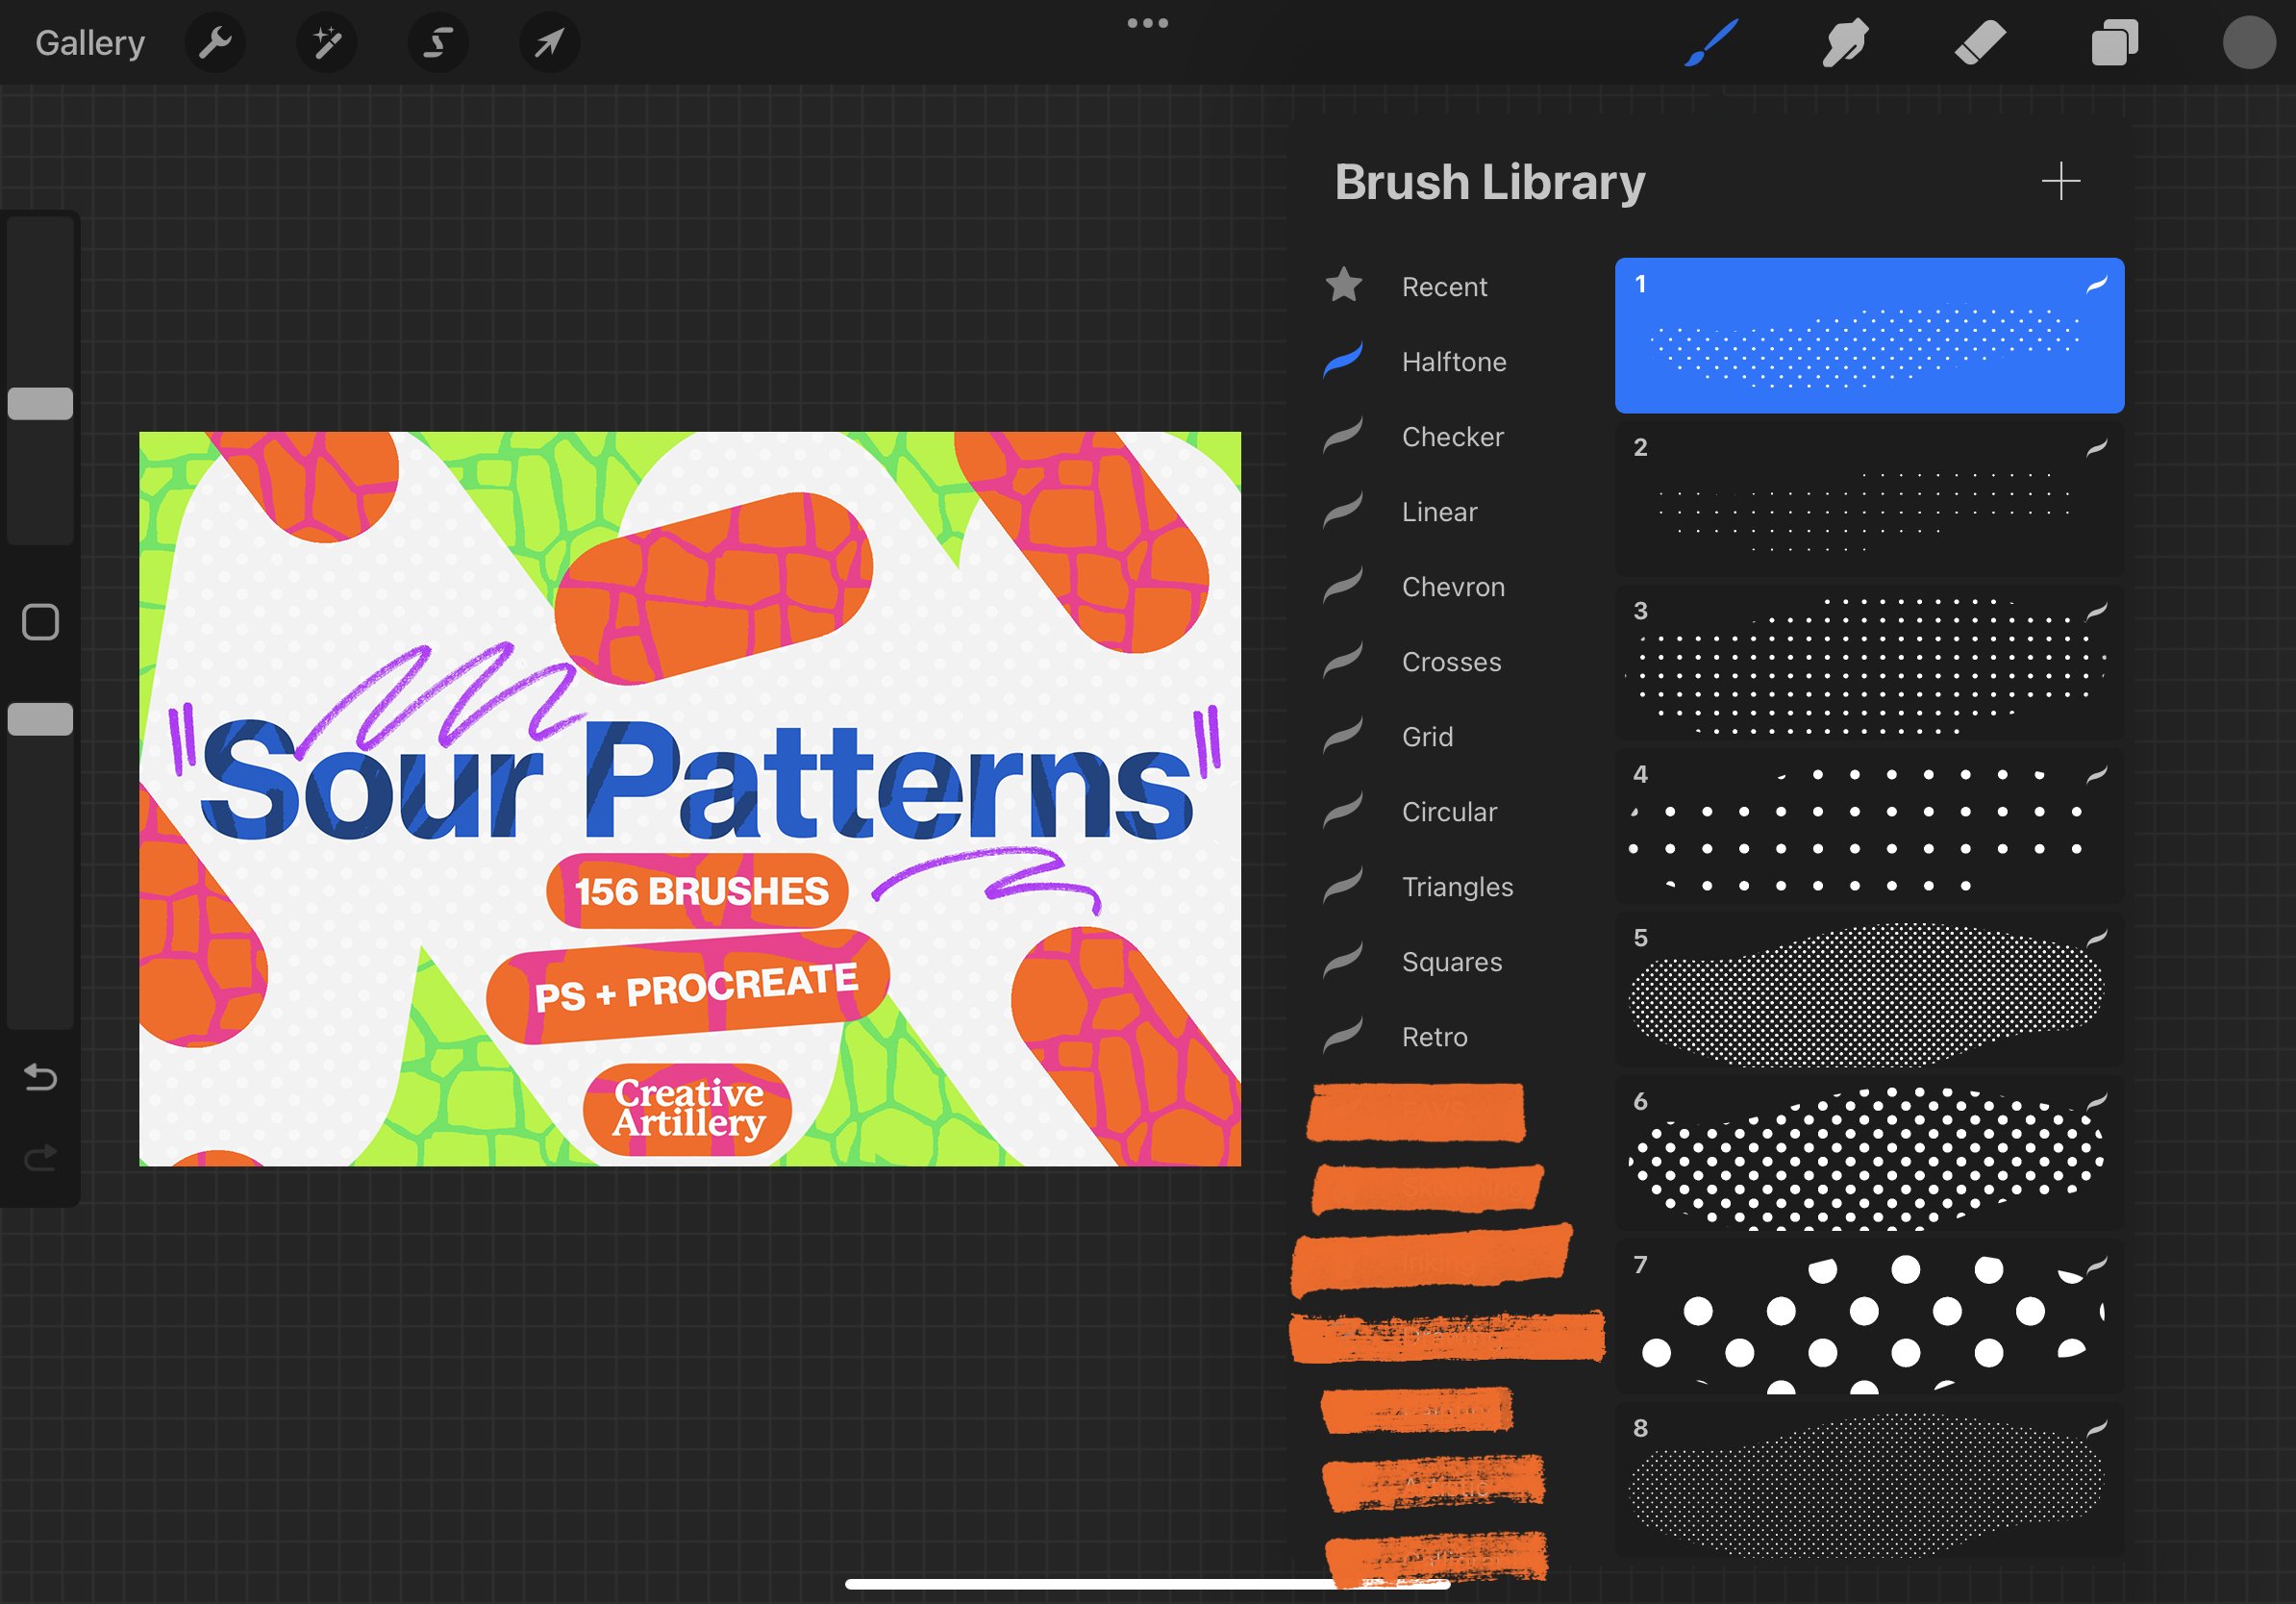 Sour Patterns Brushpreview image.